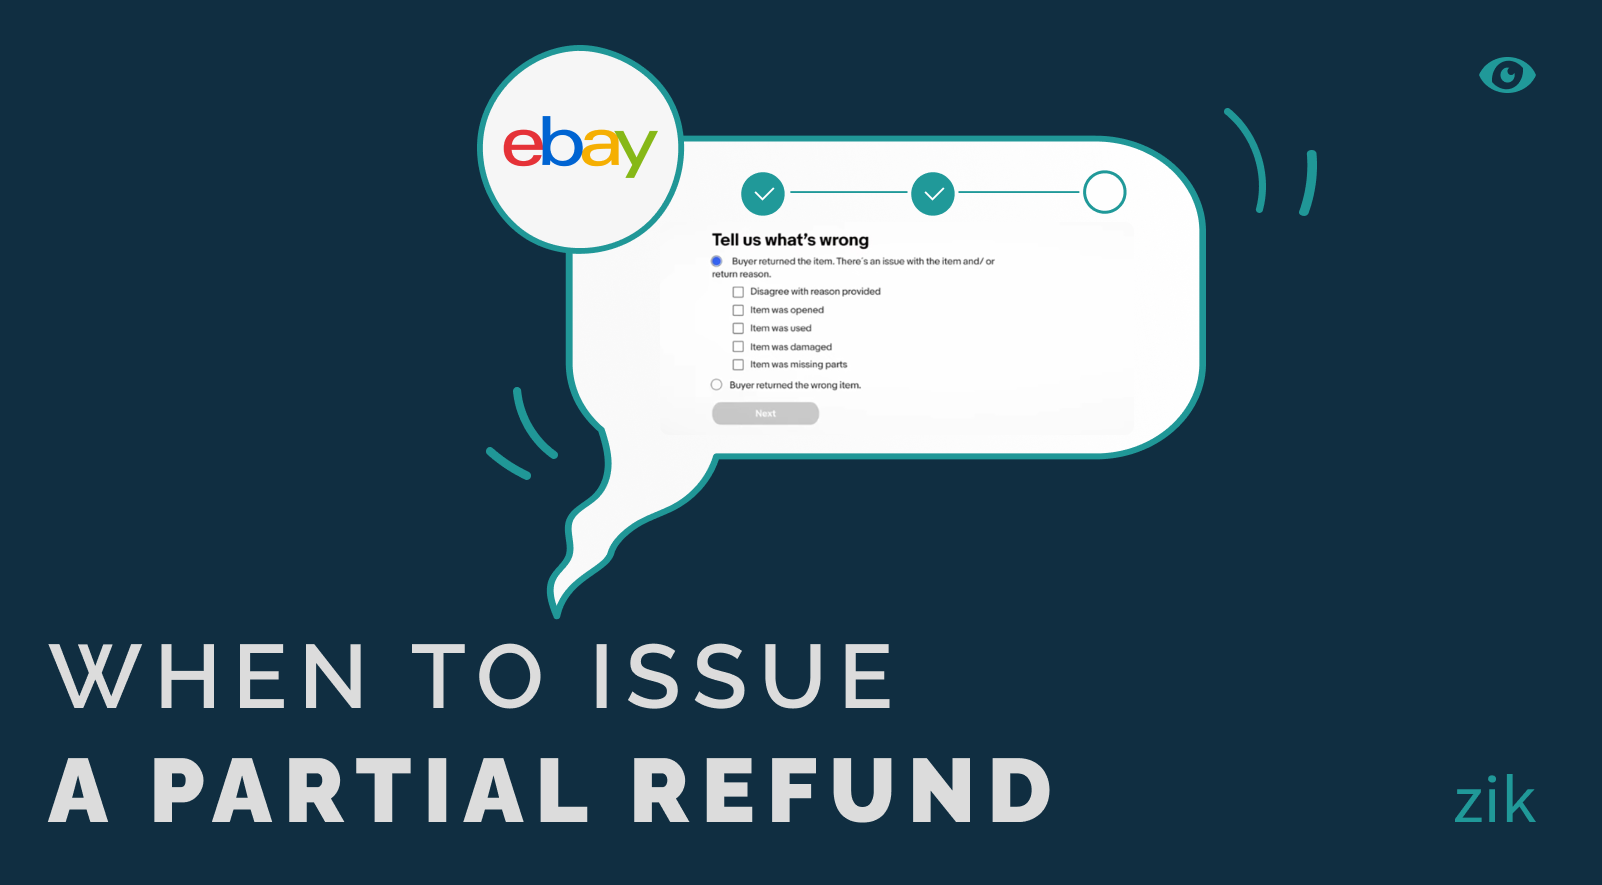 When to issue a partial refund